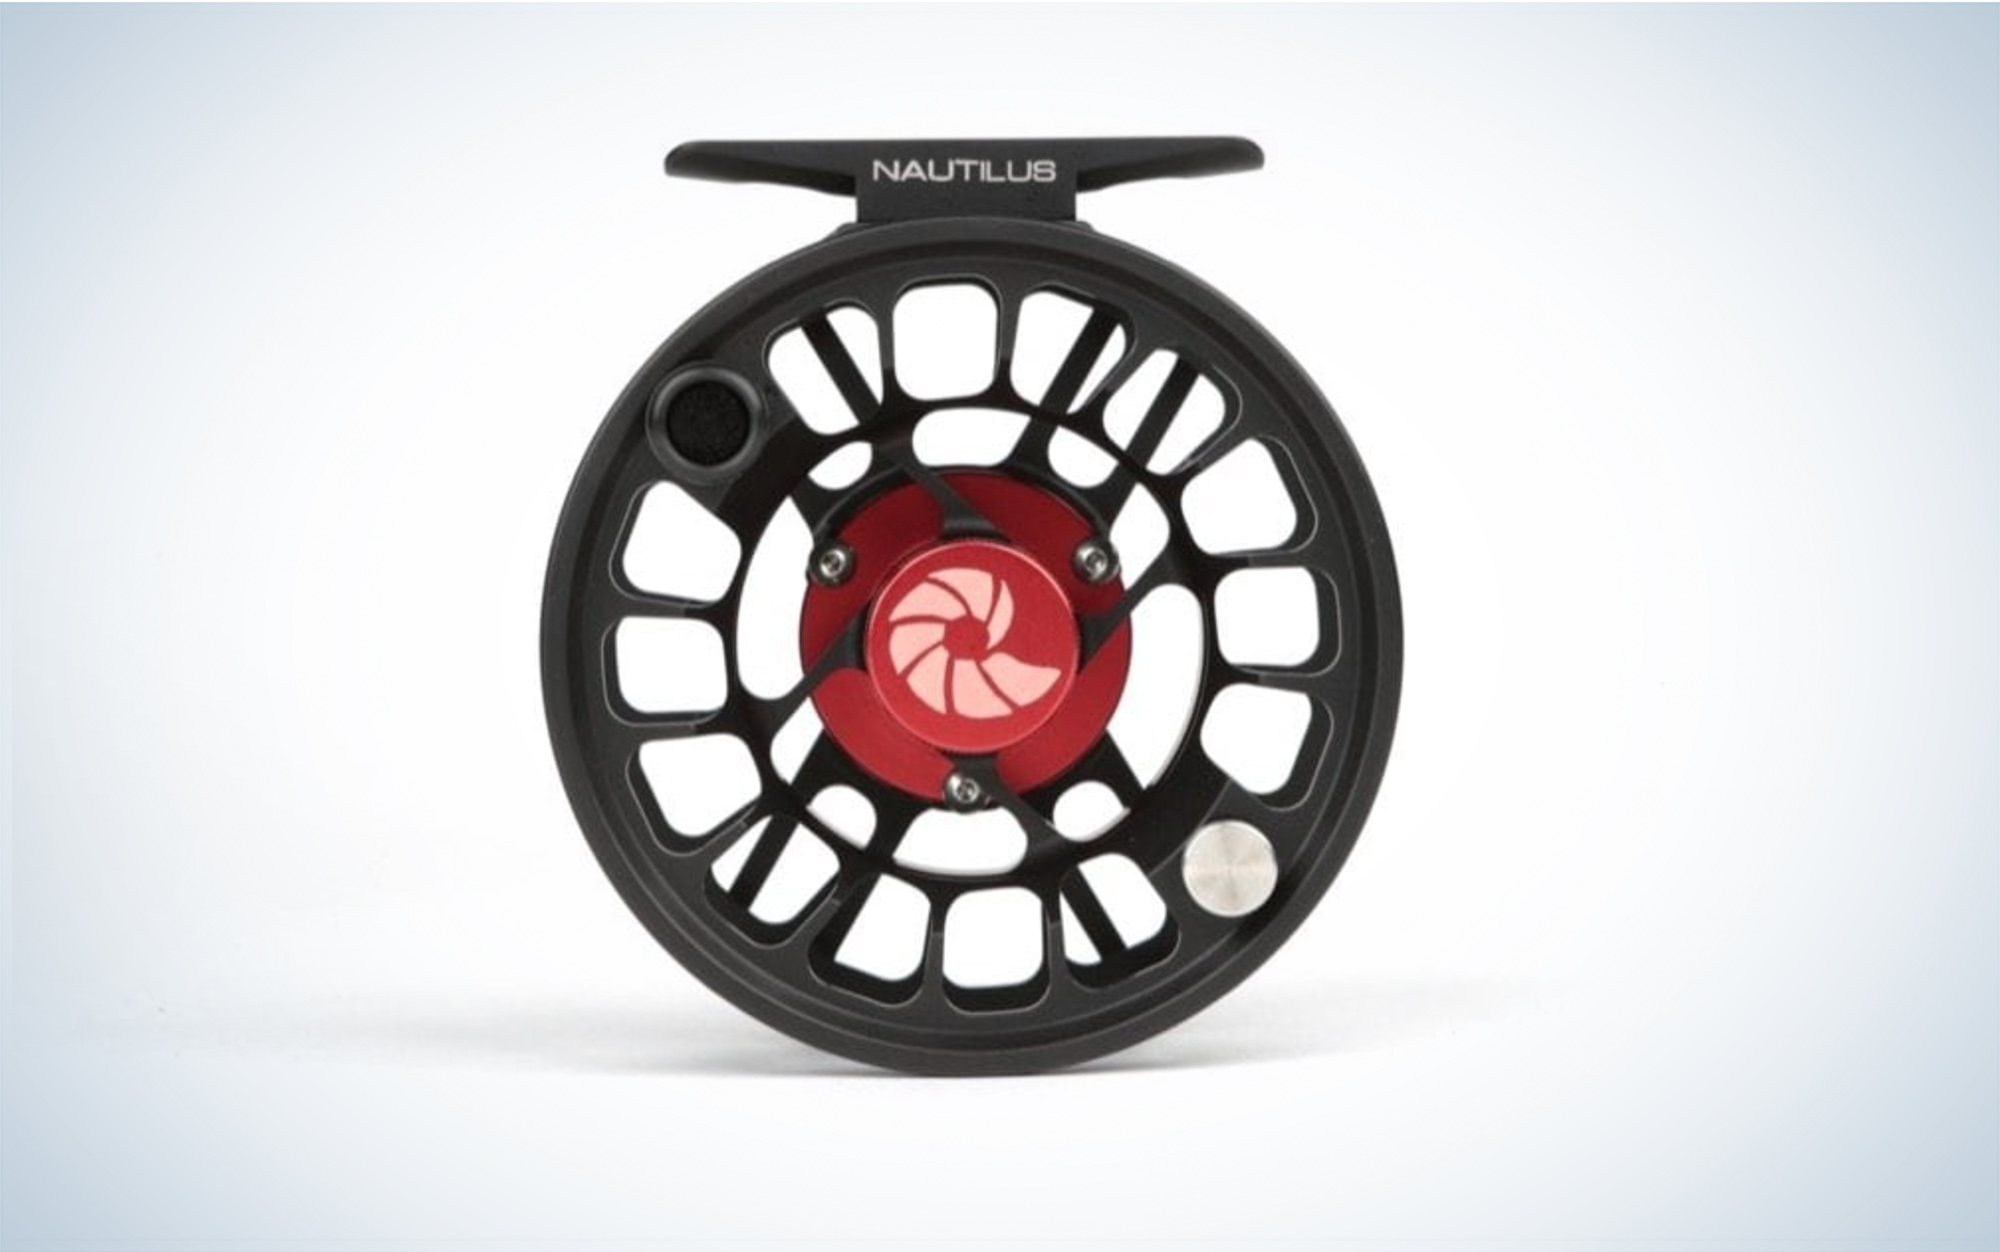 The Nautilus X Series is the best for flats fishing.